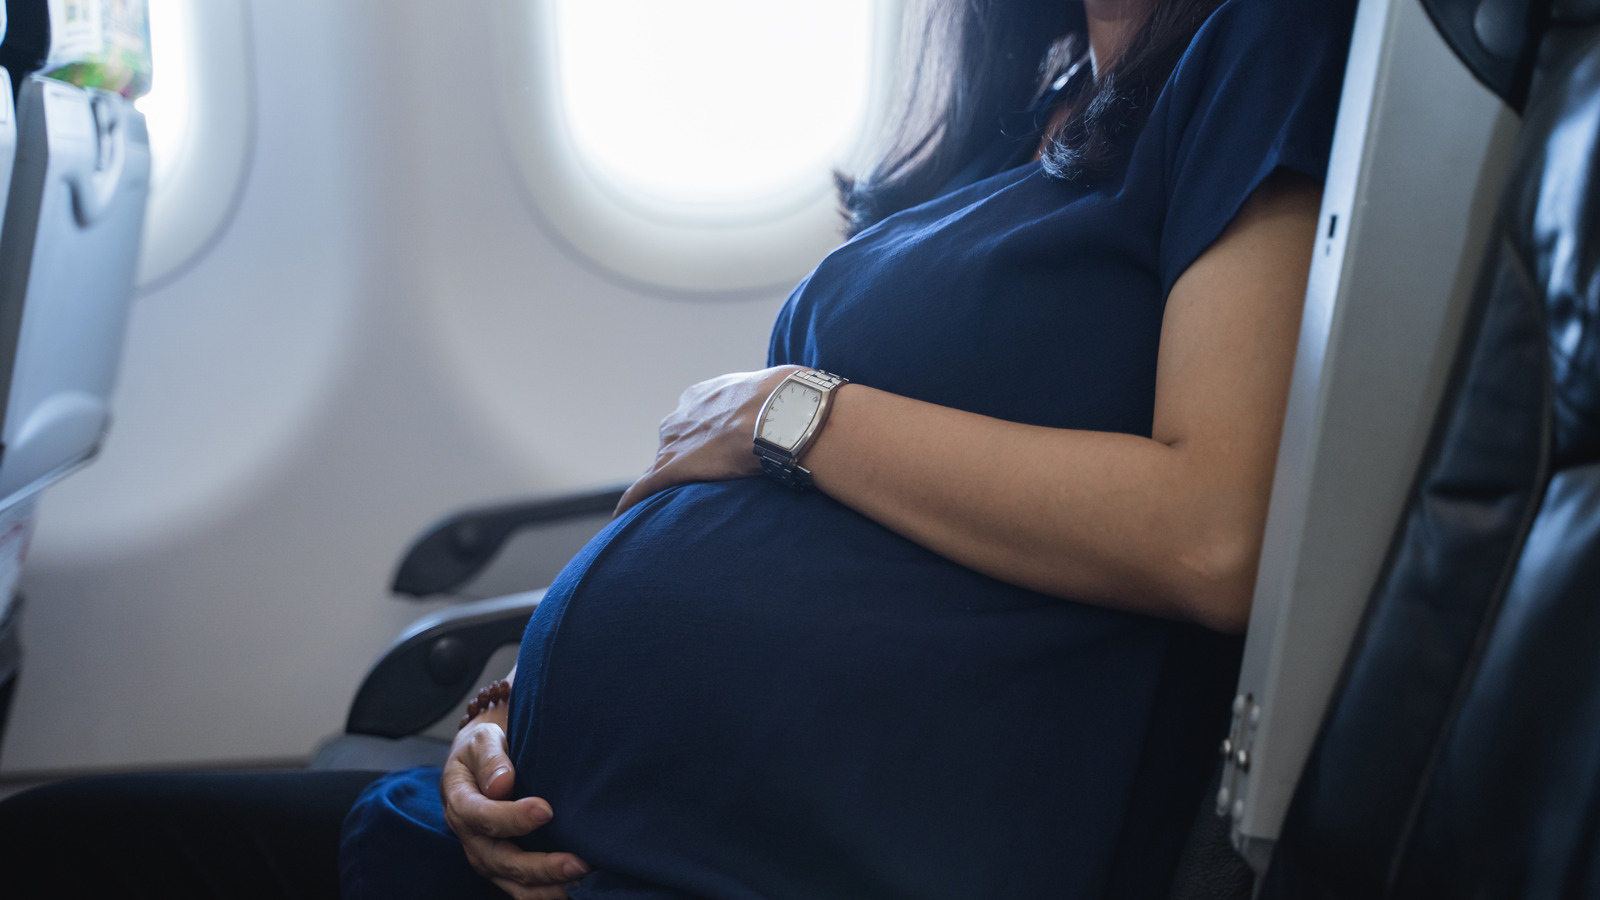 Tips on how to stay safe while flying with a pregnant woman